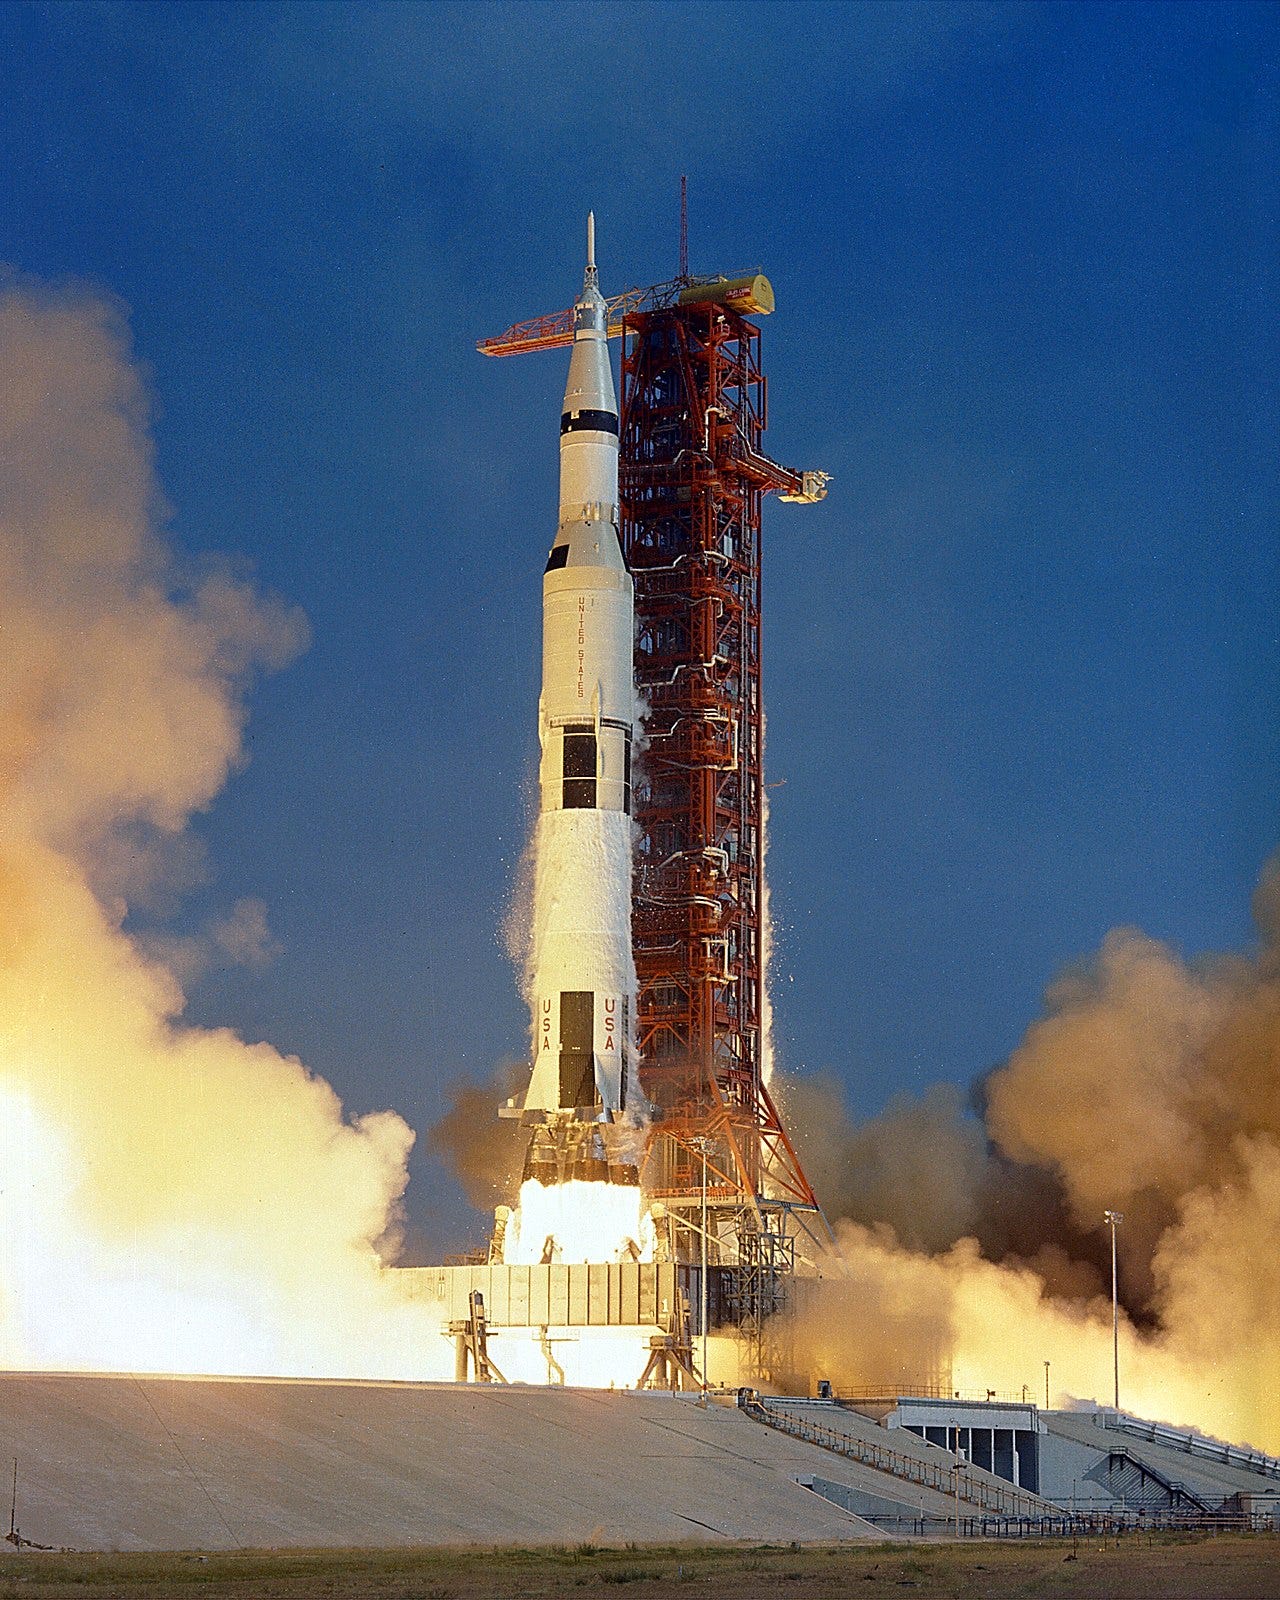 A Saturn V rocket with engines firing on the launch tower